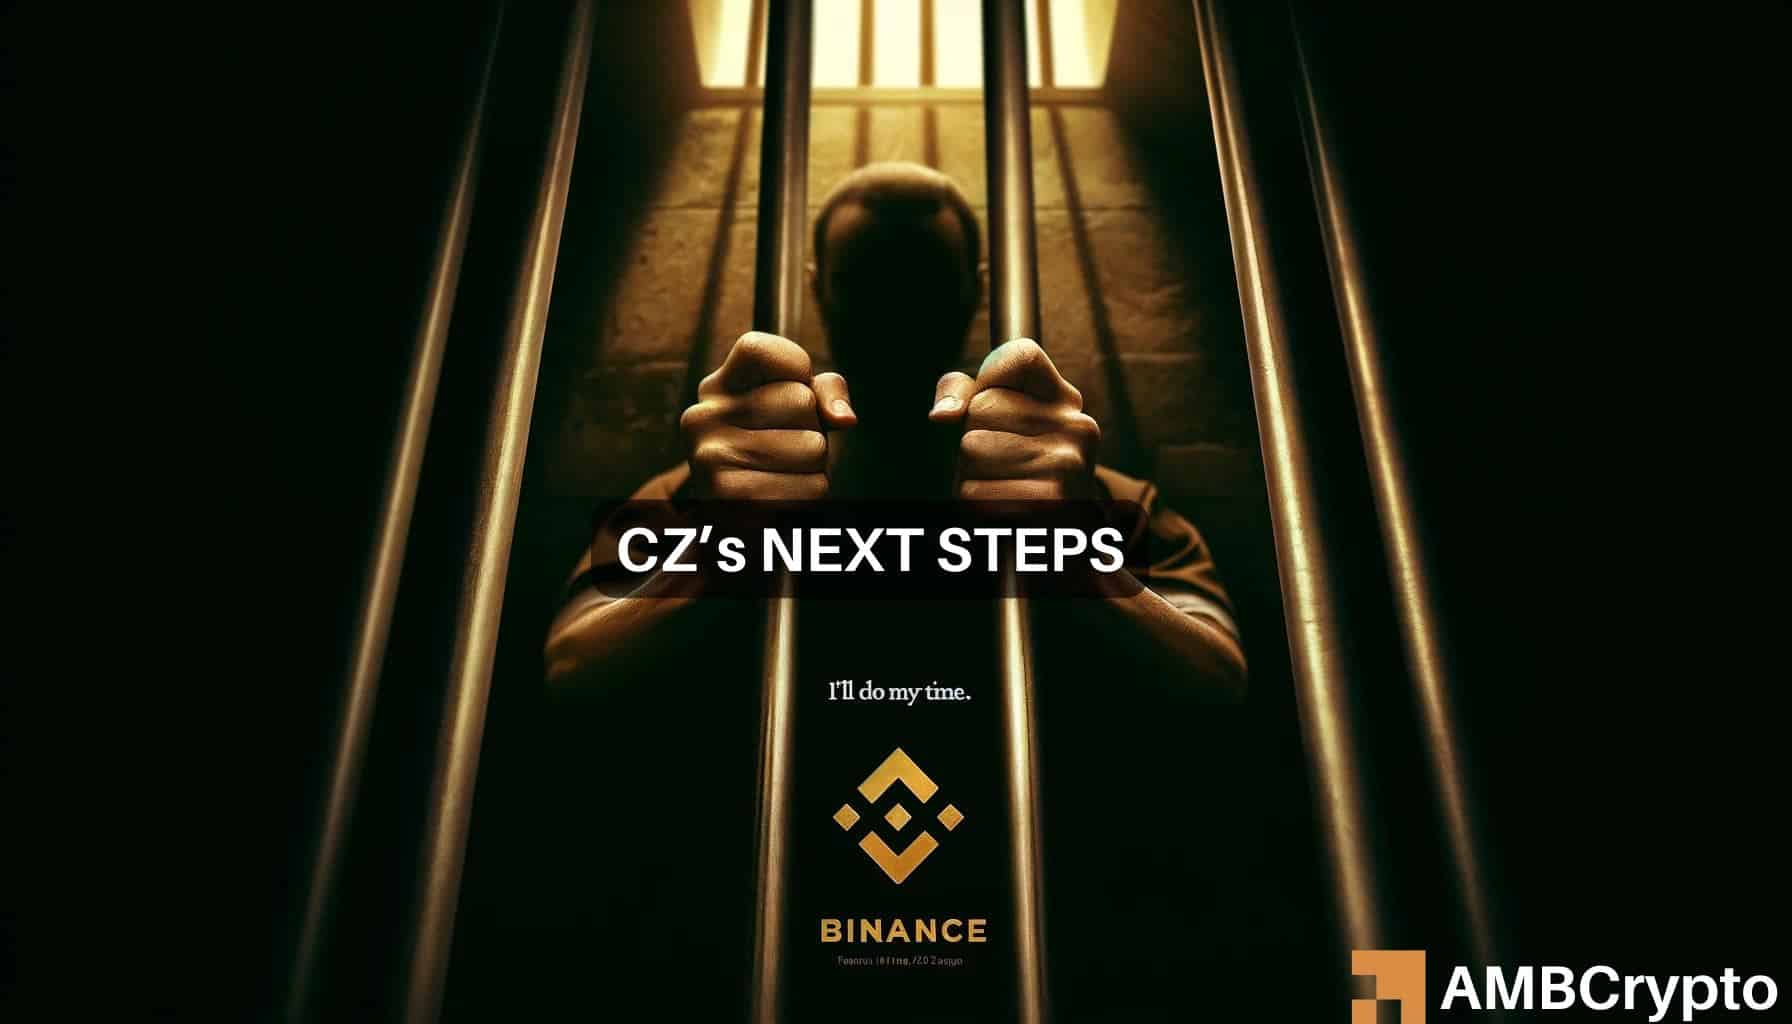 What’s next for Binance founder CZ after his 4-month sentence?